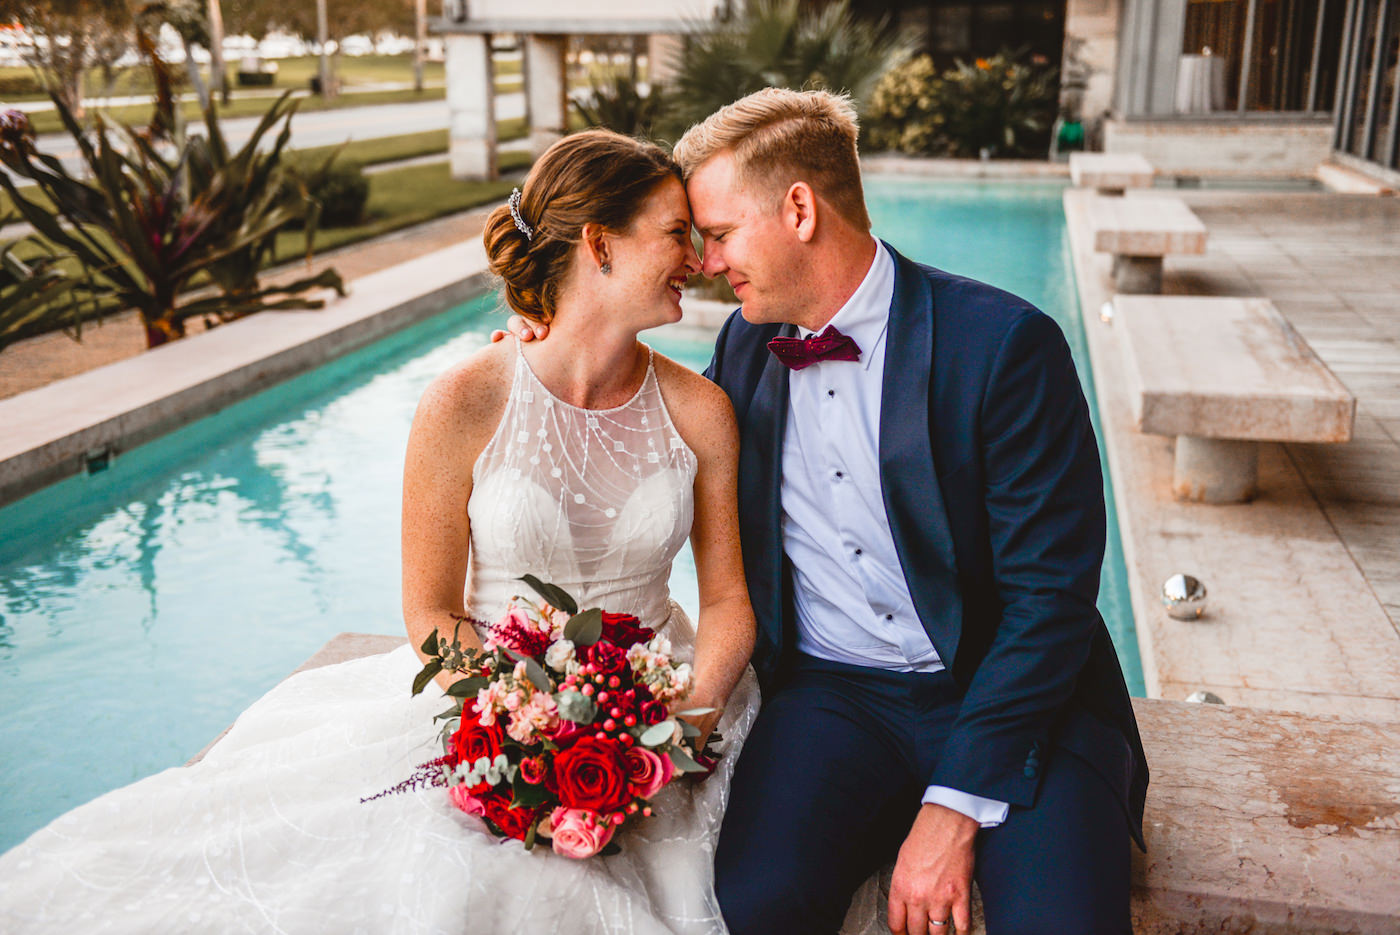 Bride and Groom Outdoor Waterfront Portrait at St. Pete Wedding Venue The Poynter Institute | White Embroidered Organza Ballgown Illusion Neck Bib Neckline Bridal Gown | Groom Classic Navy Blue Suit | Tampa Wedding Dress Shop Truly Forever Bridal